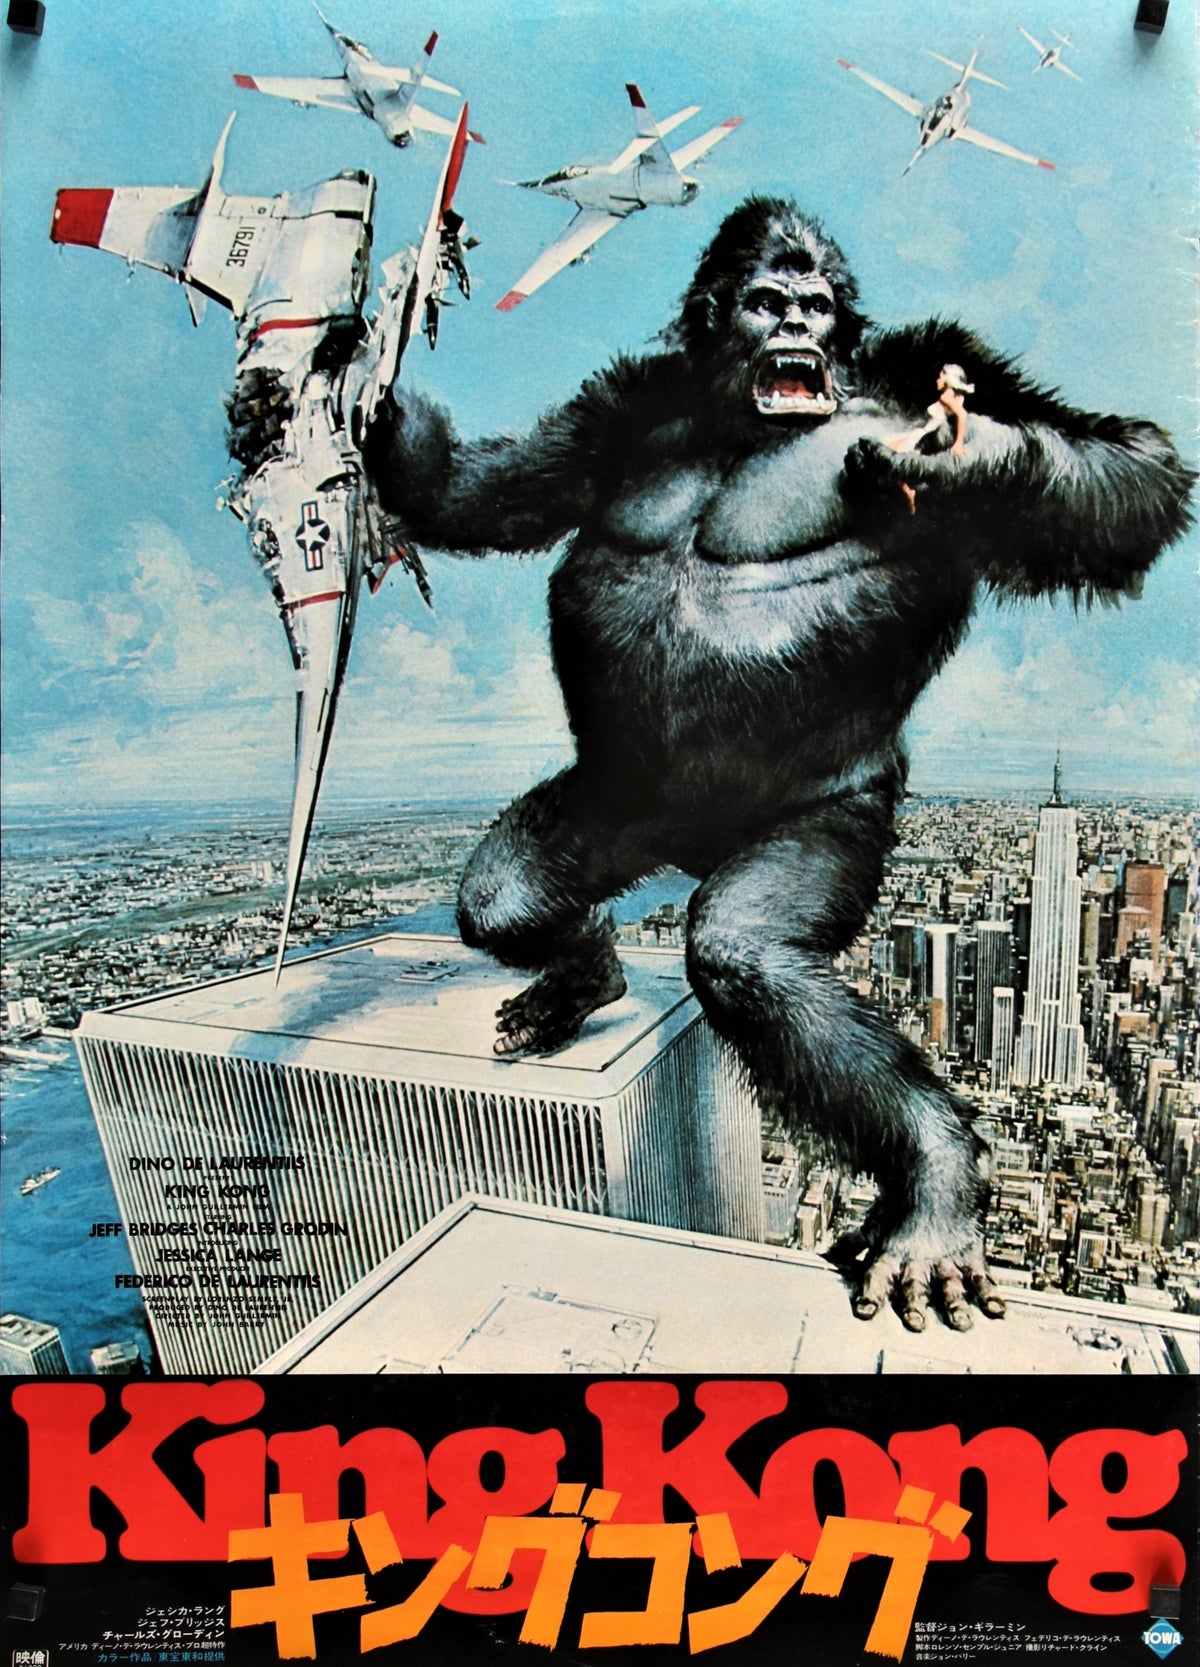 King Kong- Japanese Release - Authentic Vintage Poster